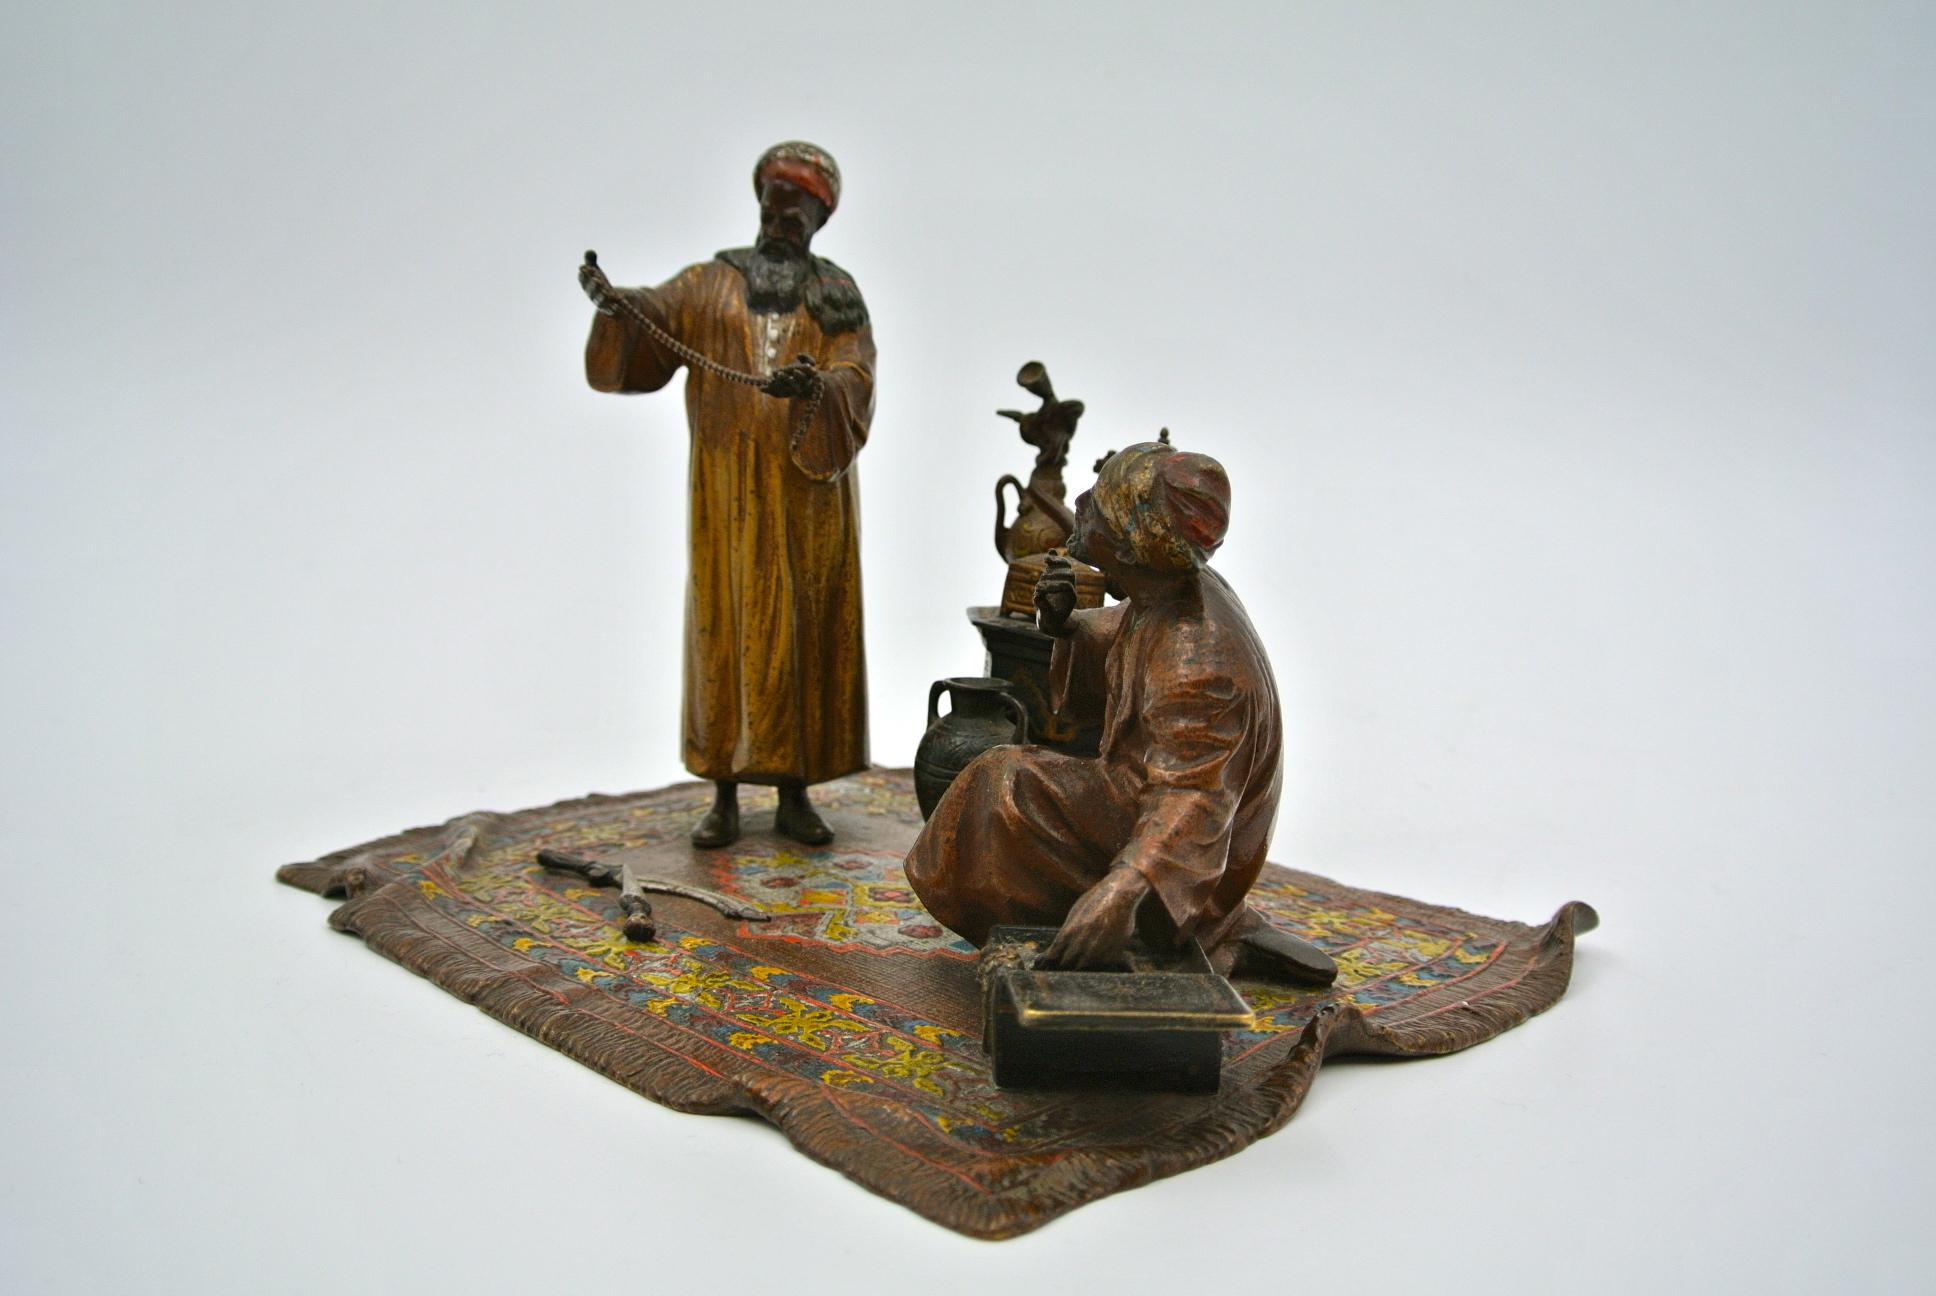 Bronze the jewellery merchant and his client by Anton Chotka, Vienna, late 19th-early 20th century.
Measures: H 16 cm, W 22 cm, D 18 cm.